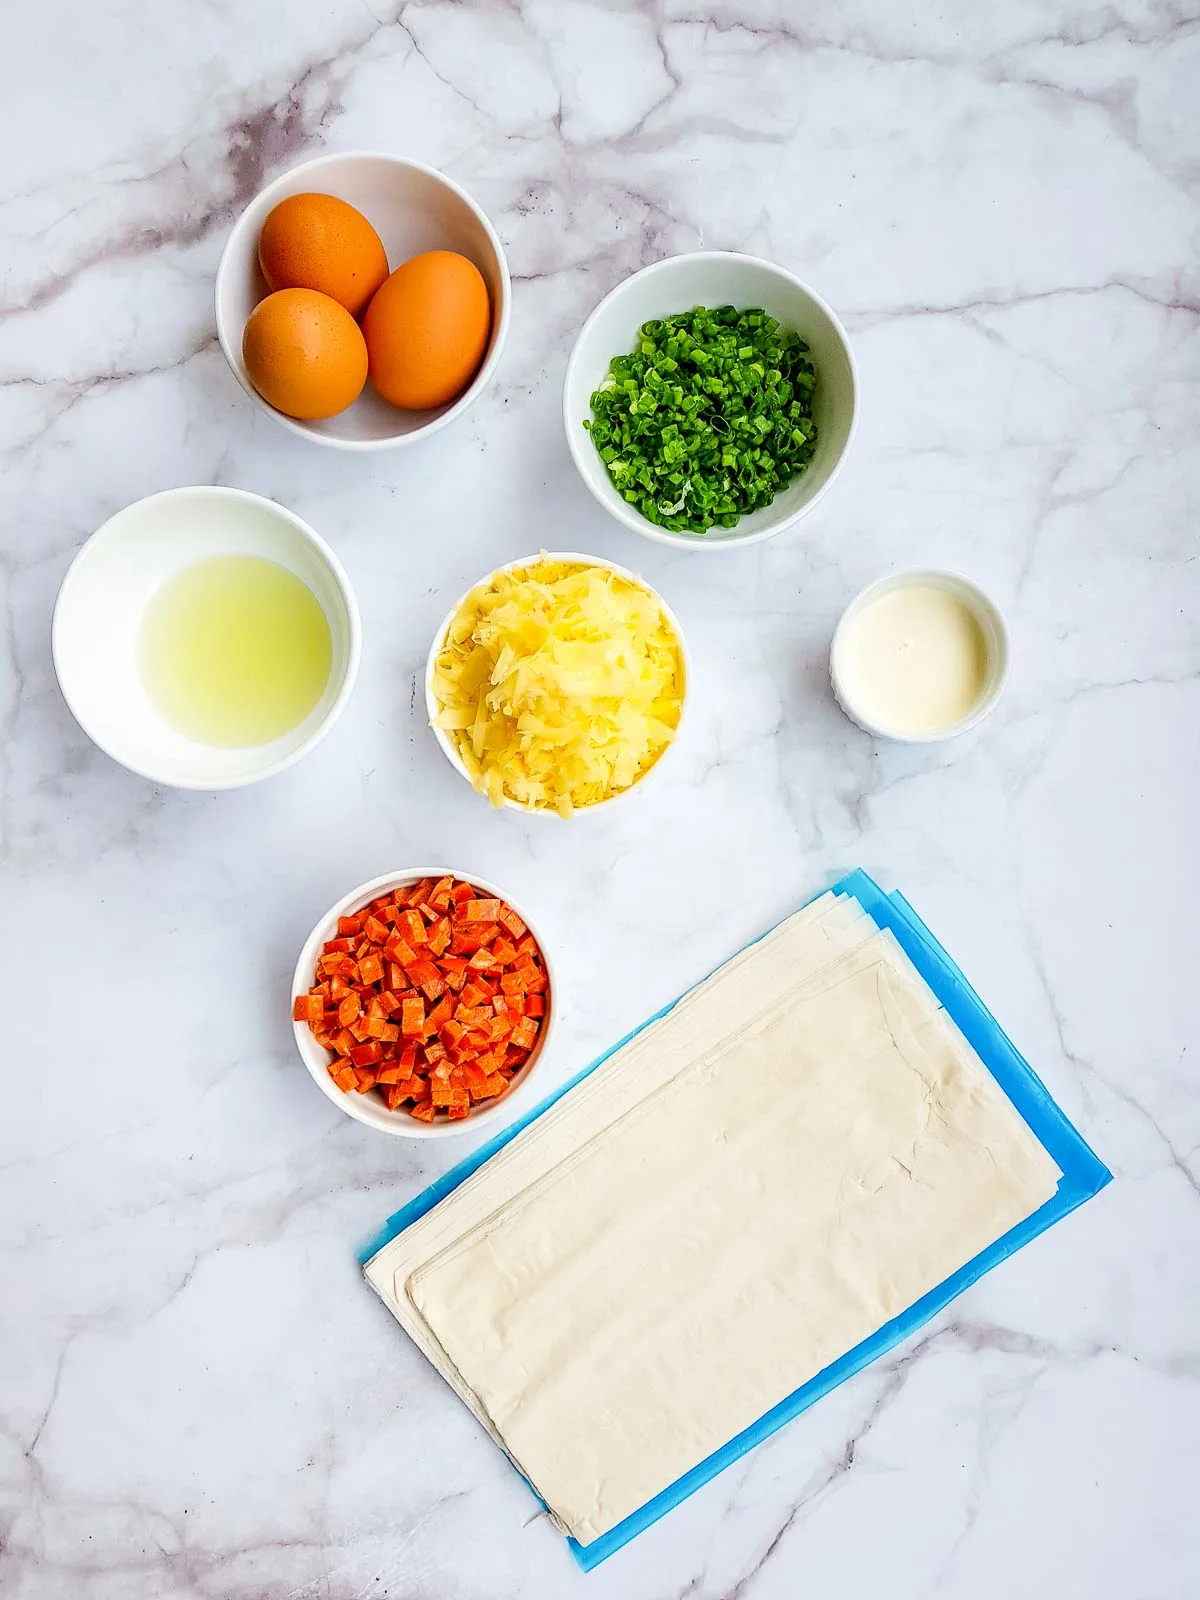 Ingredients to make mini quiches with phyllo dough crust.